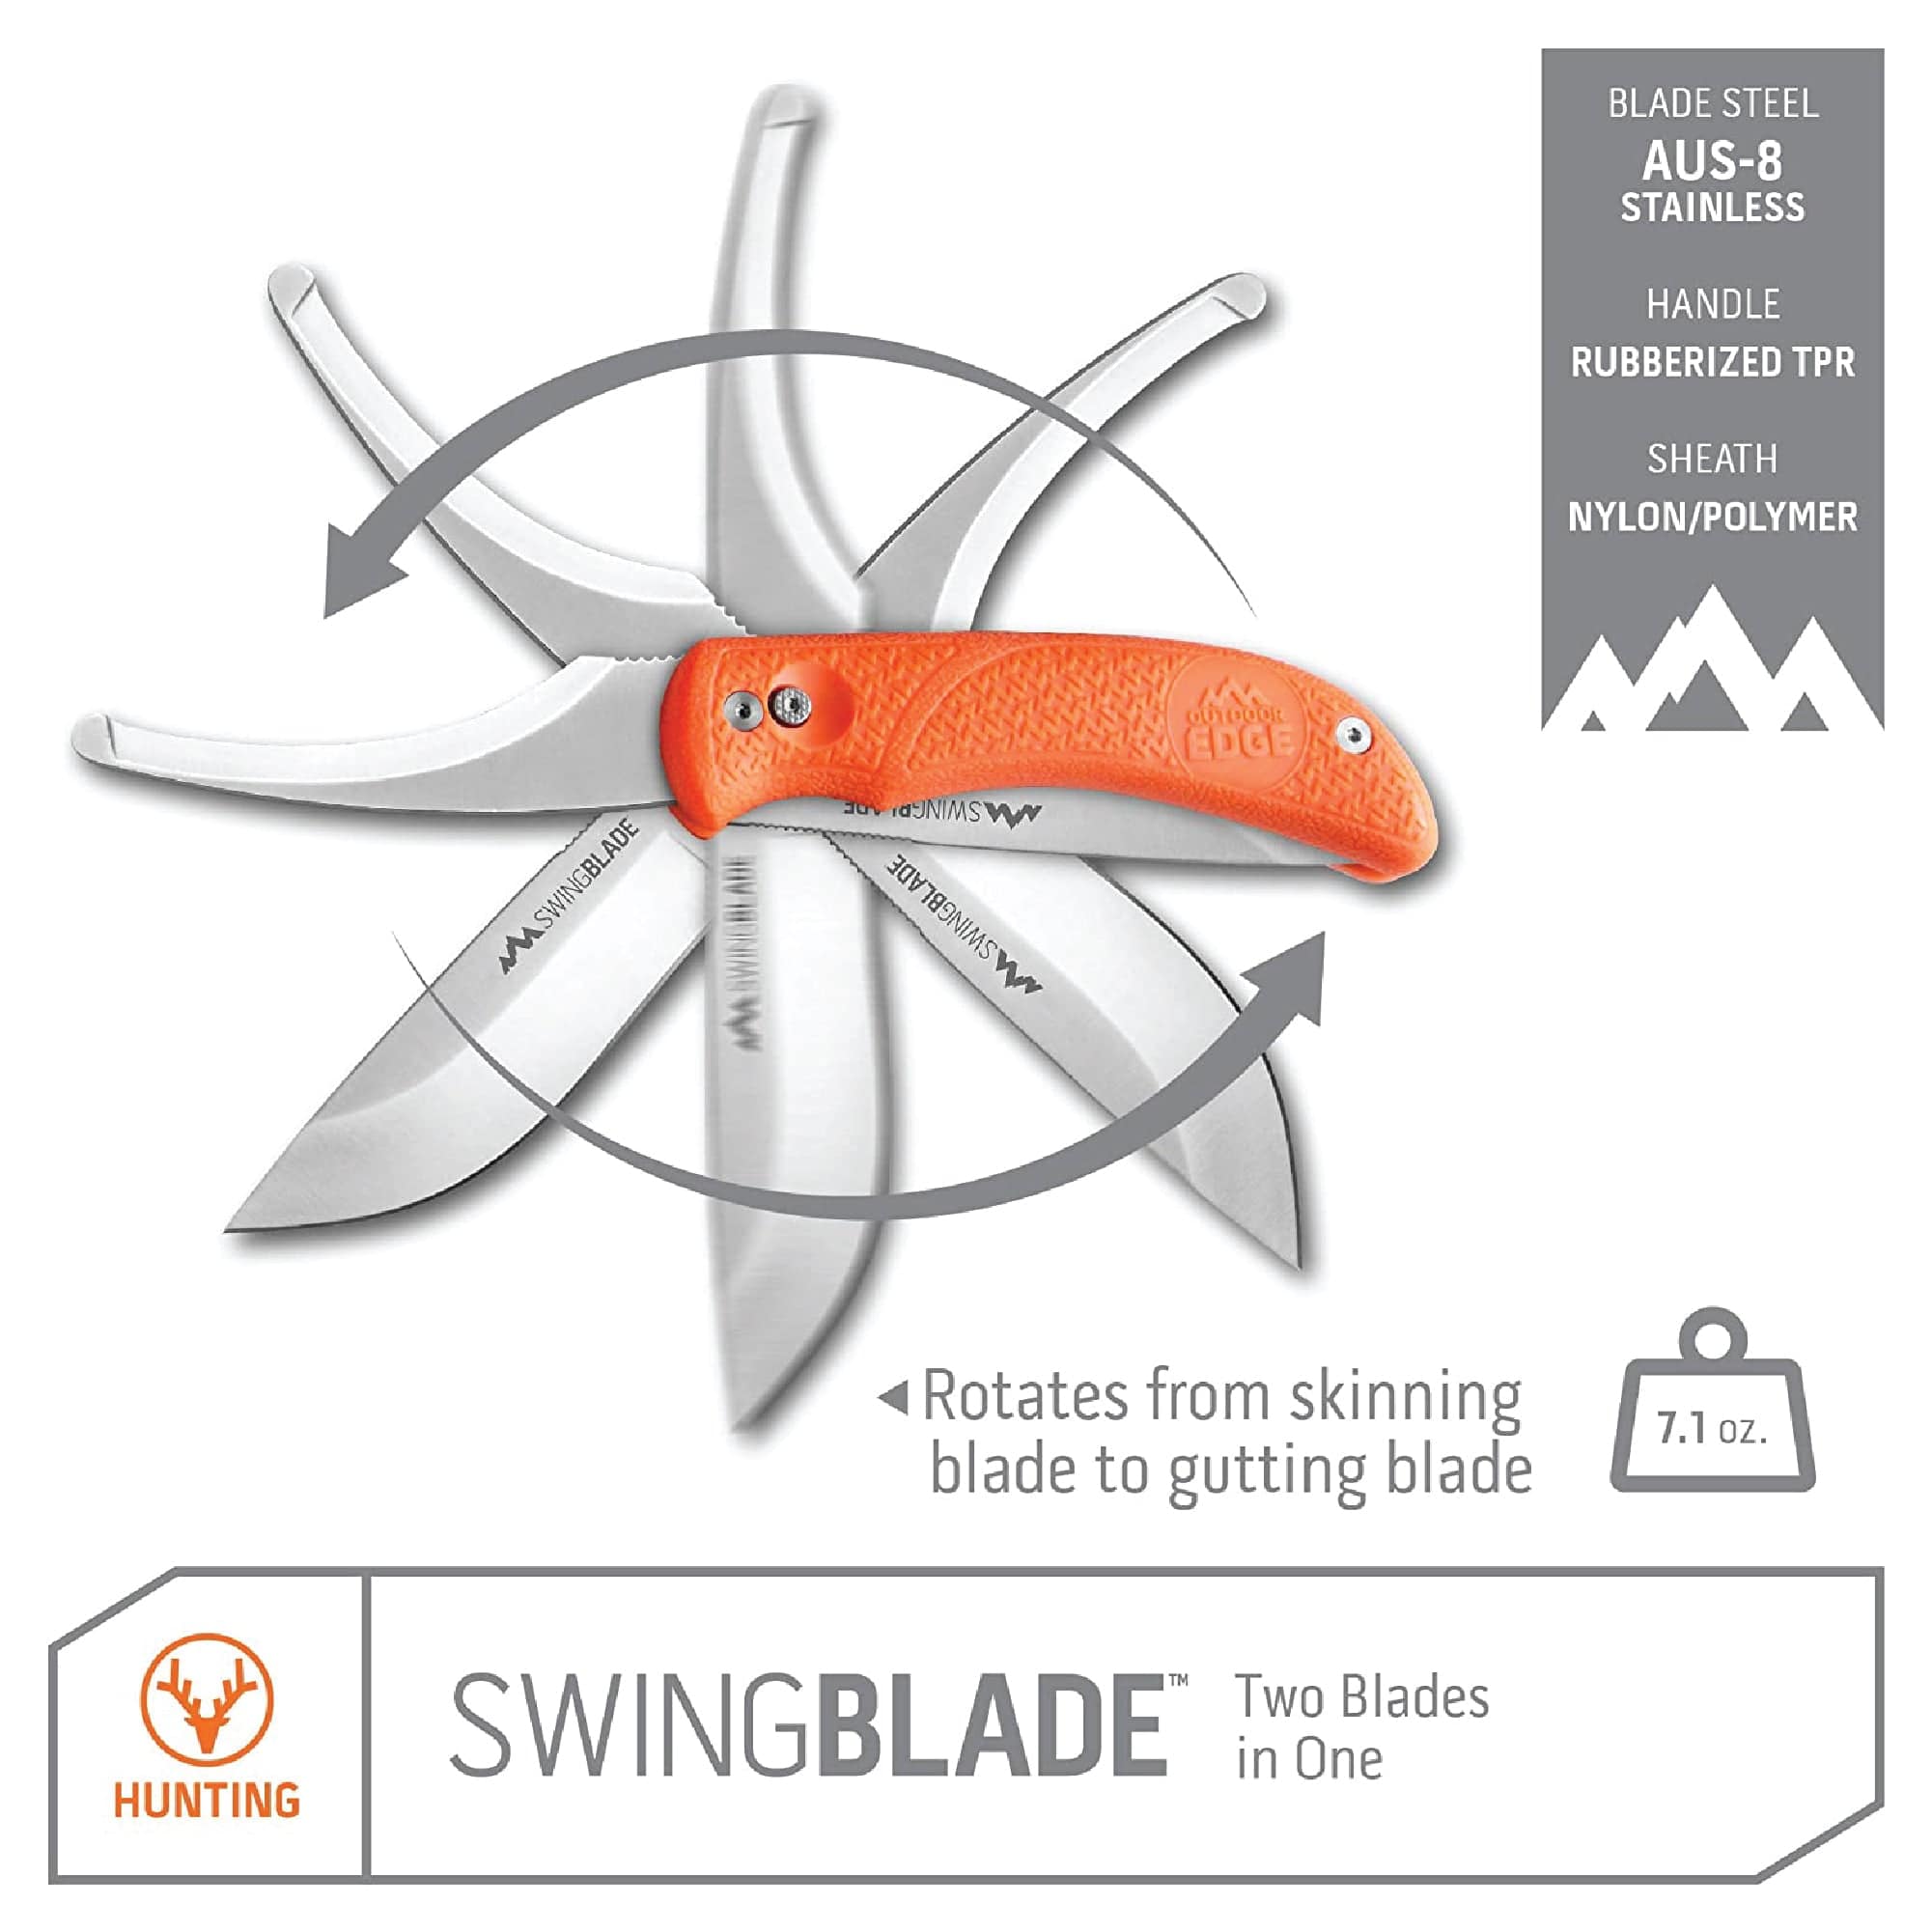 Outdoor Edge SwingBlade Hunting Knife showing two blades; skinning blade and gutting blade.